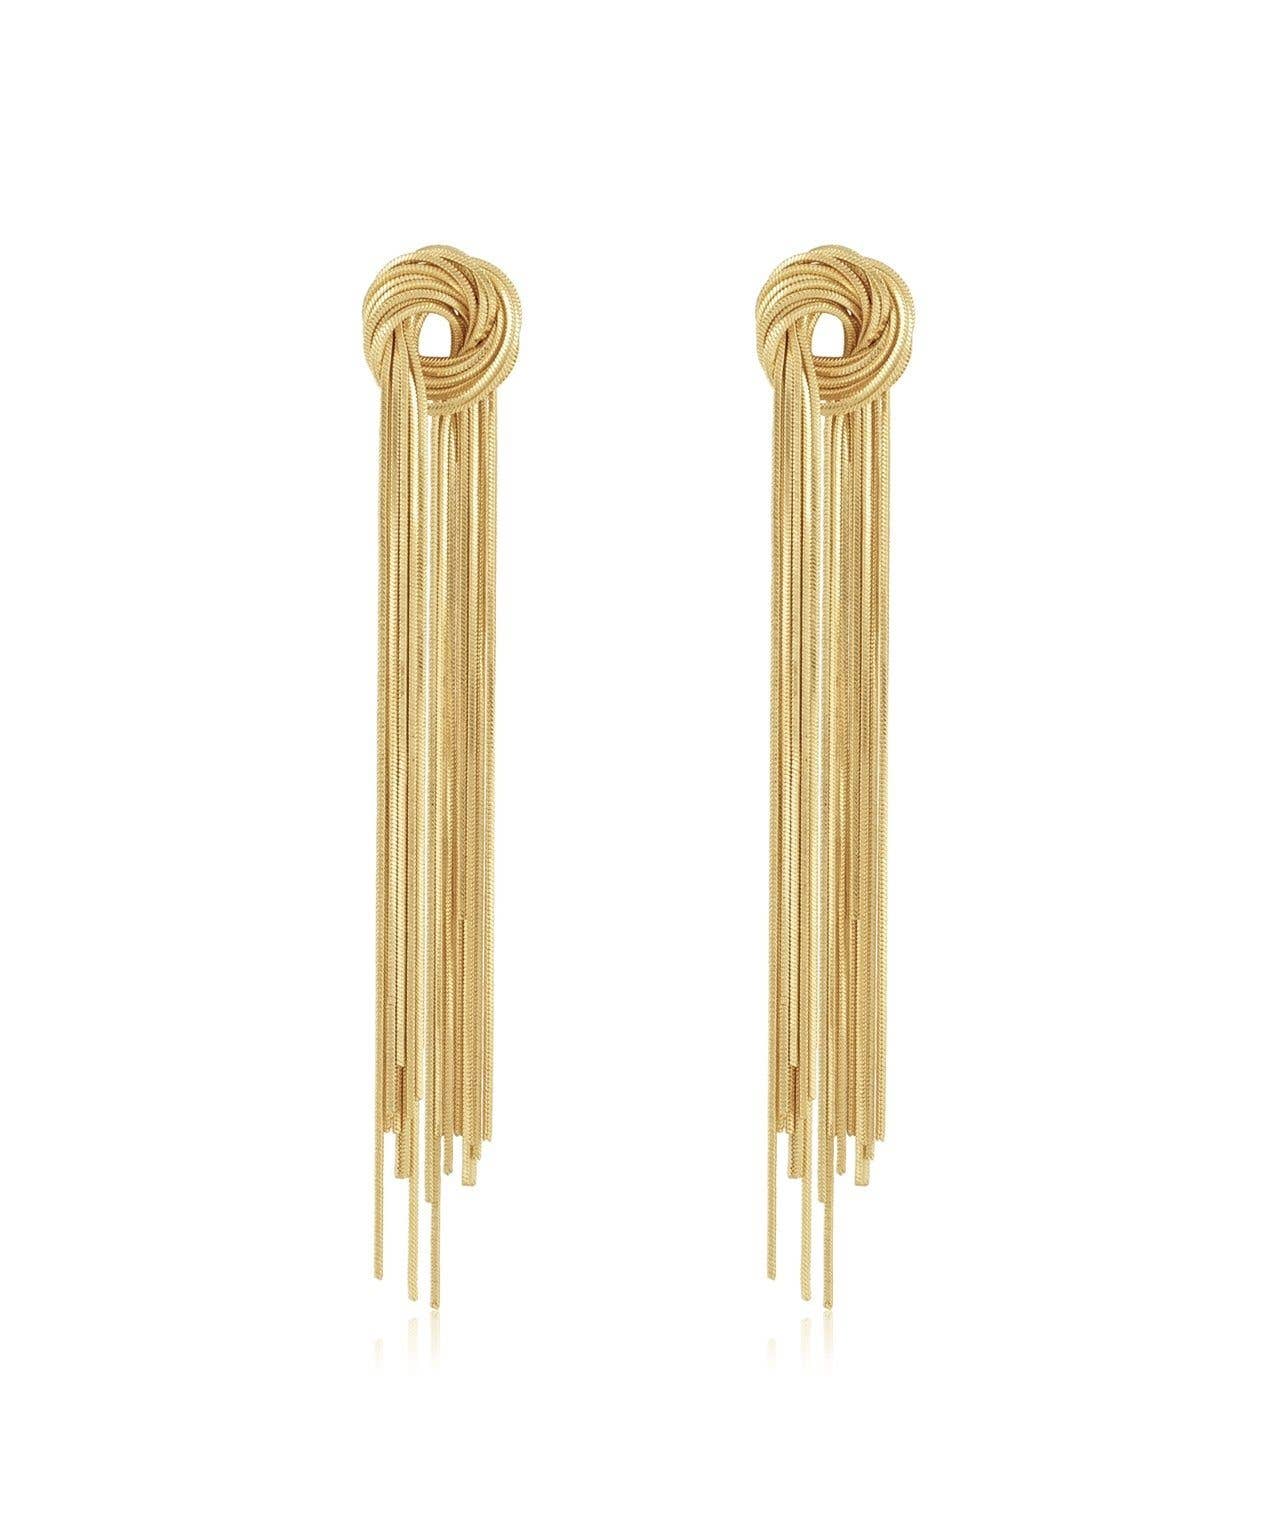 Sahira Jewelry Dominique Fringe Statement Earrings in Gold